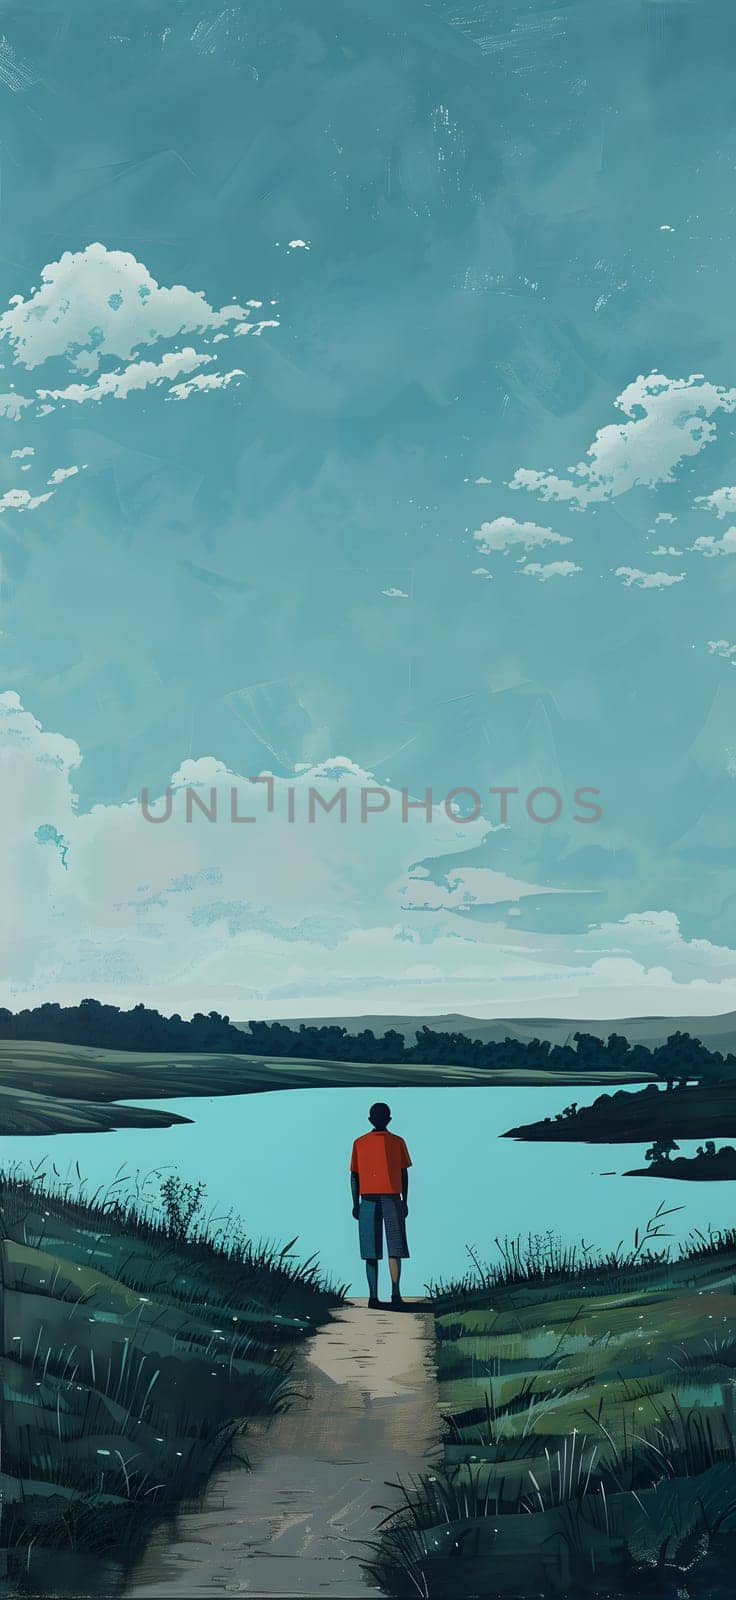 A man gazes at the calm lake under a cloudy sky in a serene natural landscape by Nadtochiy